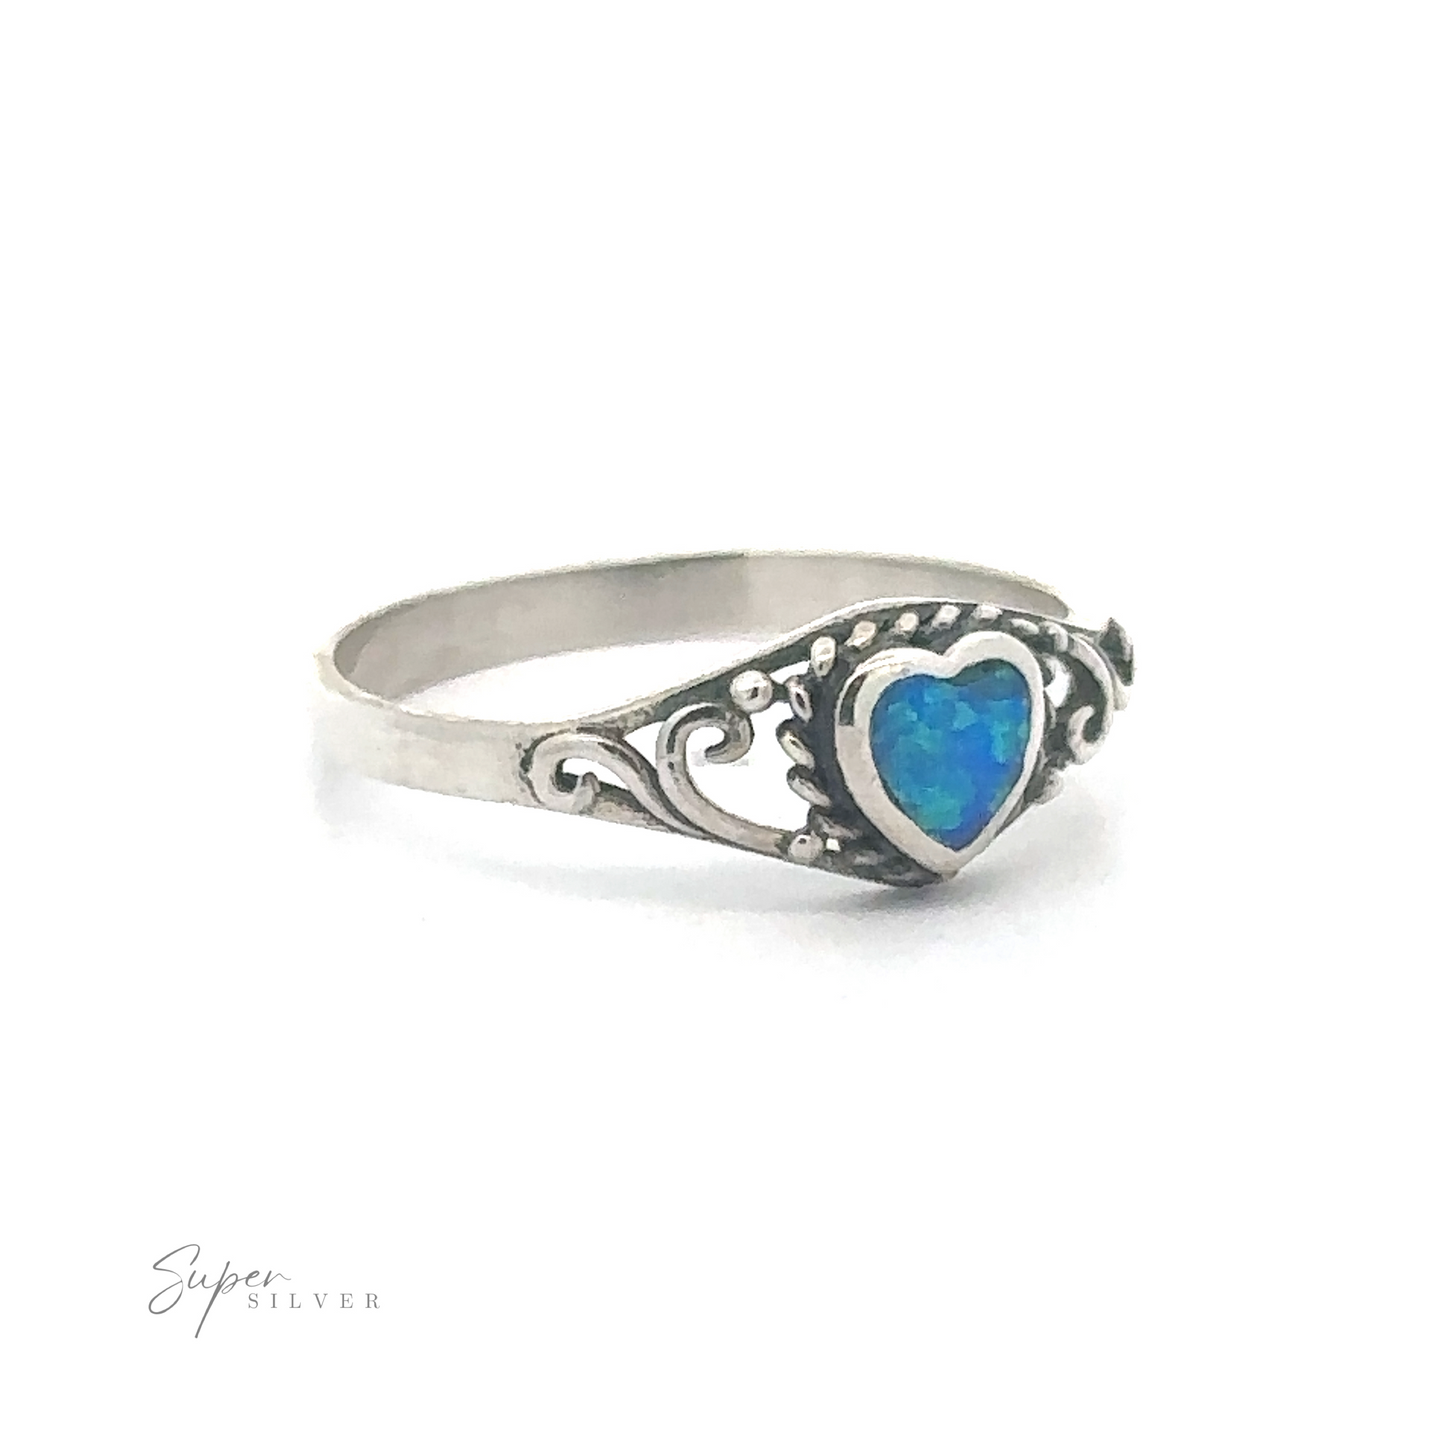 Dainty Blue Opal Heart Ring with an ornate filigree band.